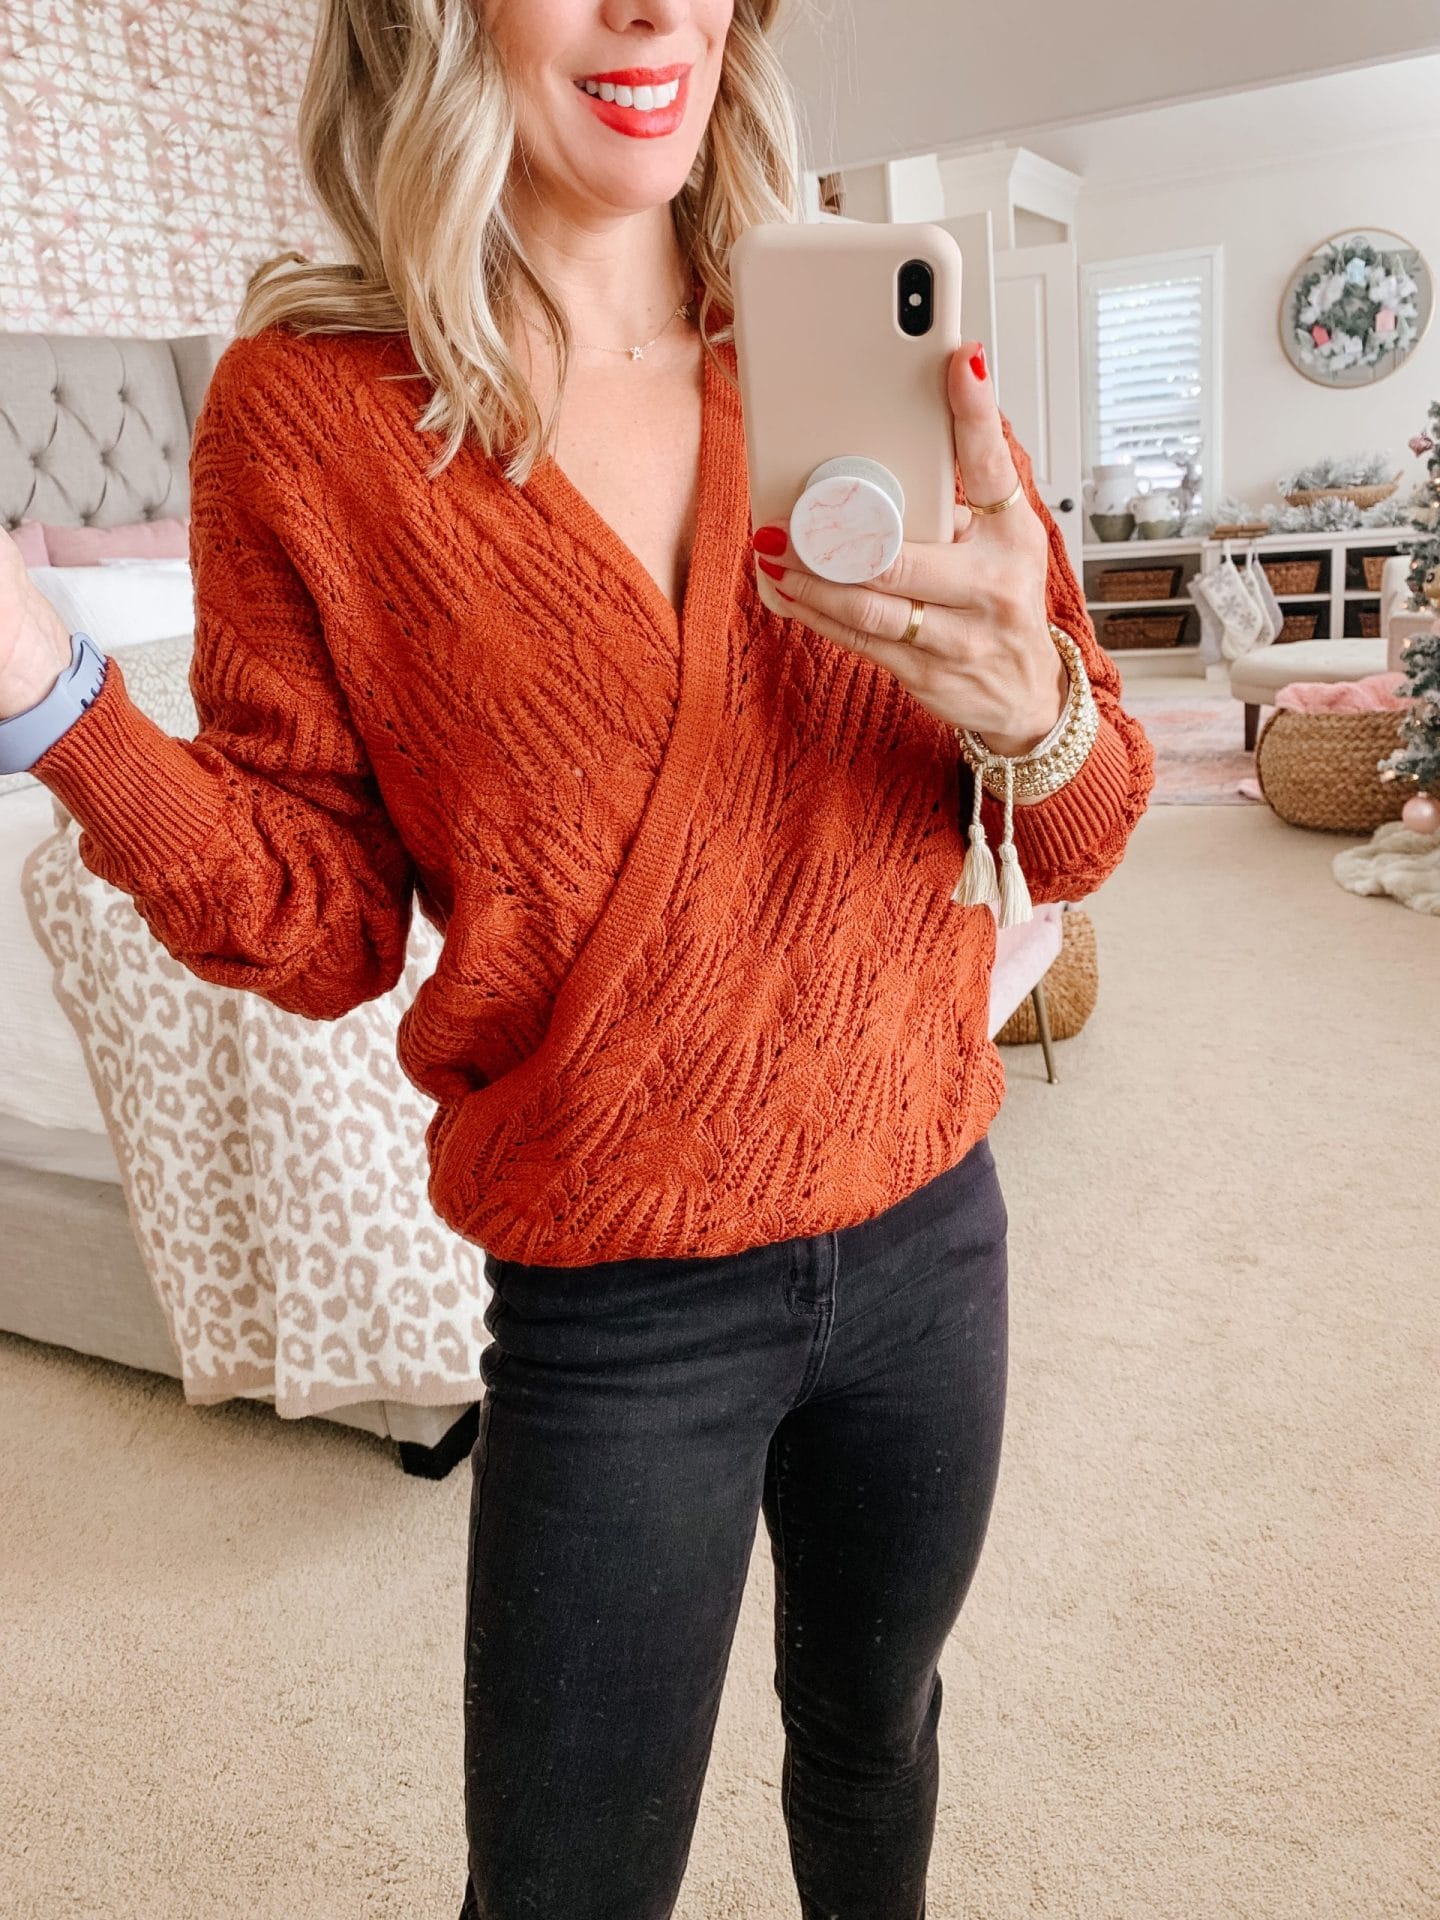 Amazon Fashion, Sweater, Jeans, Booties 